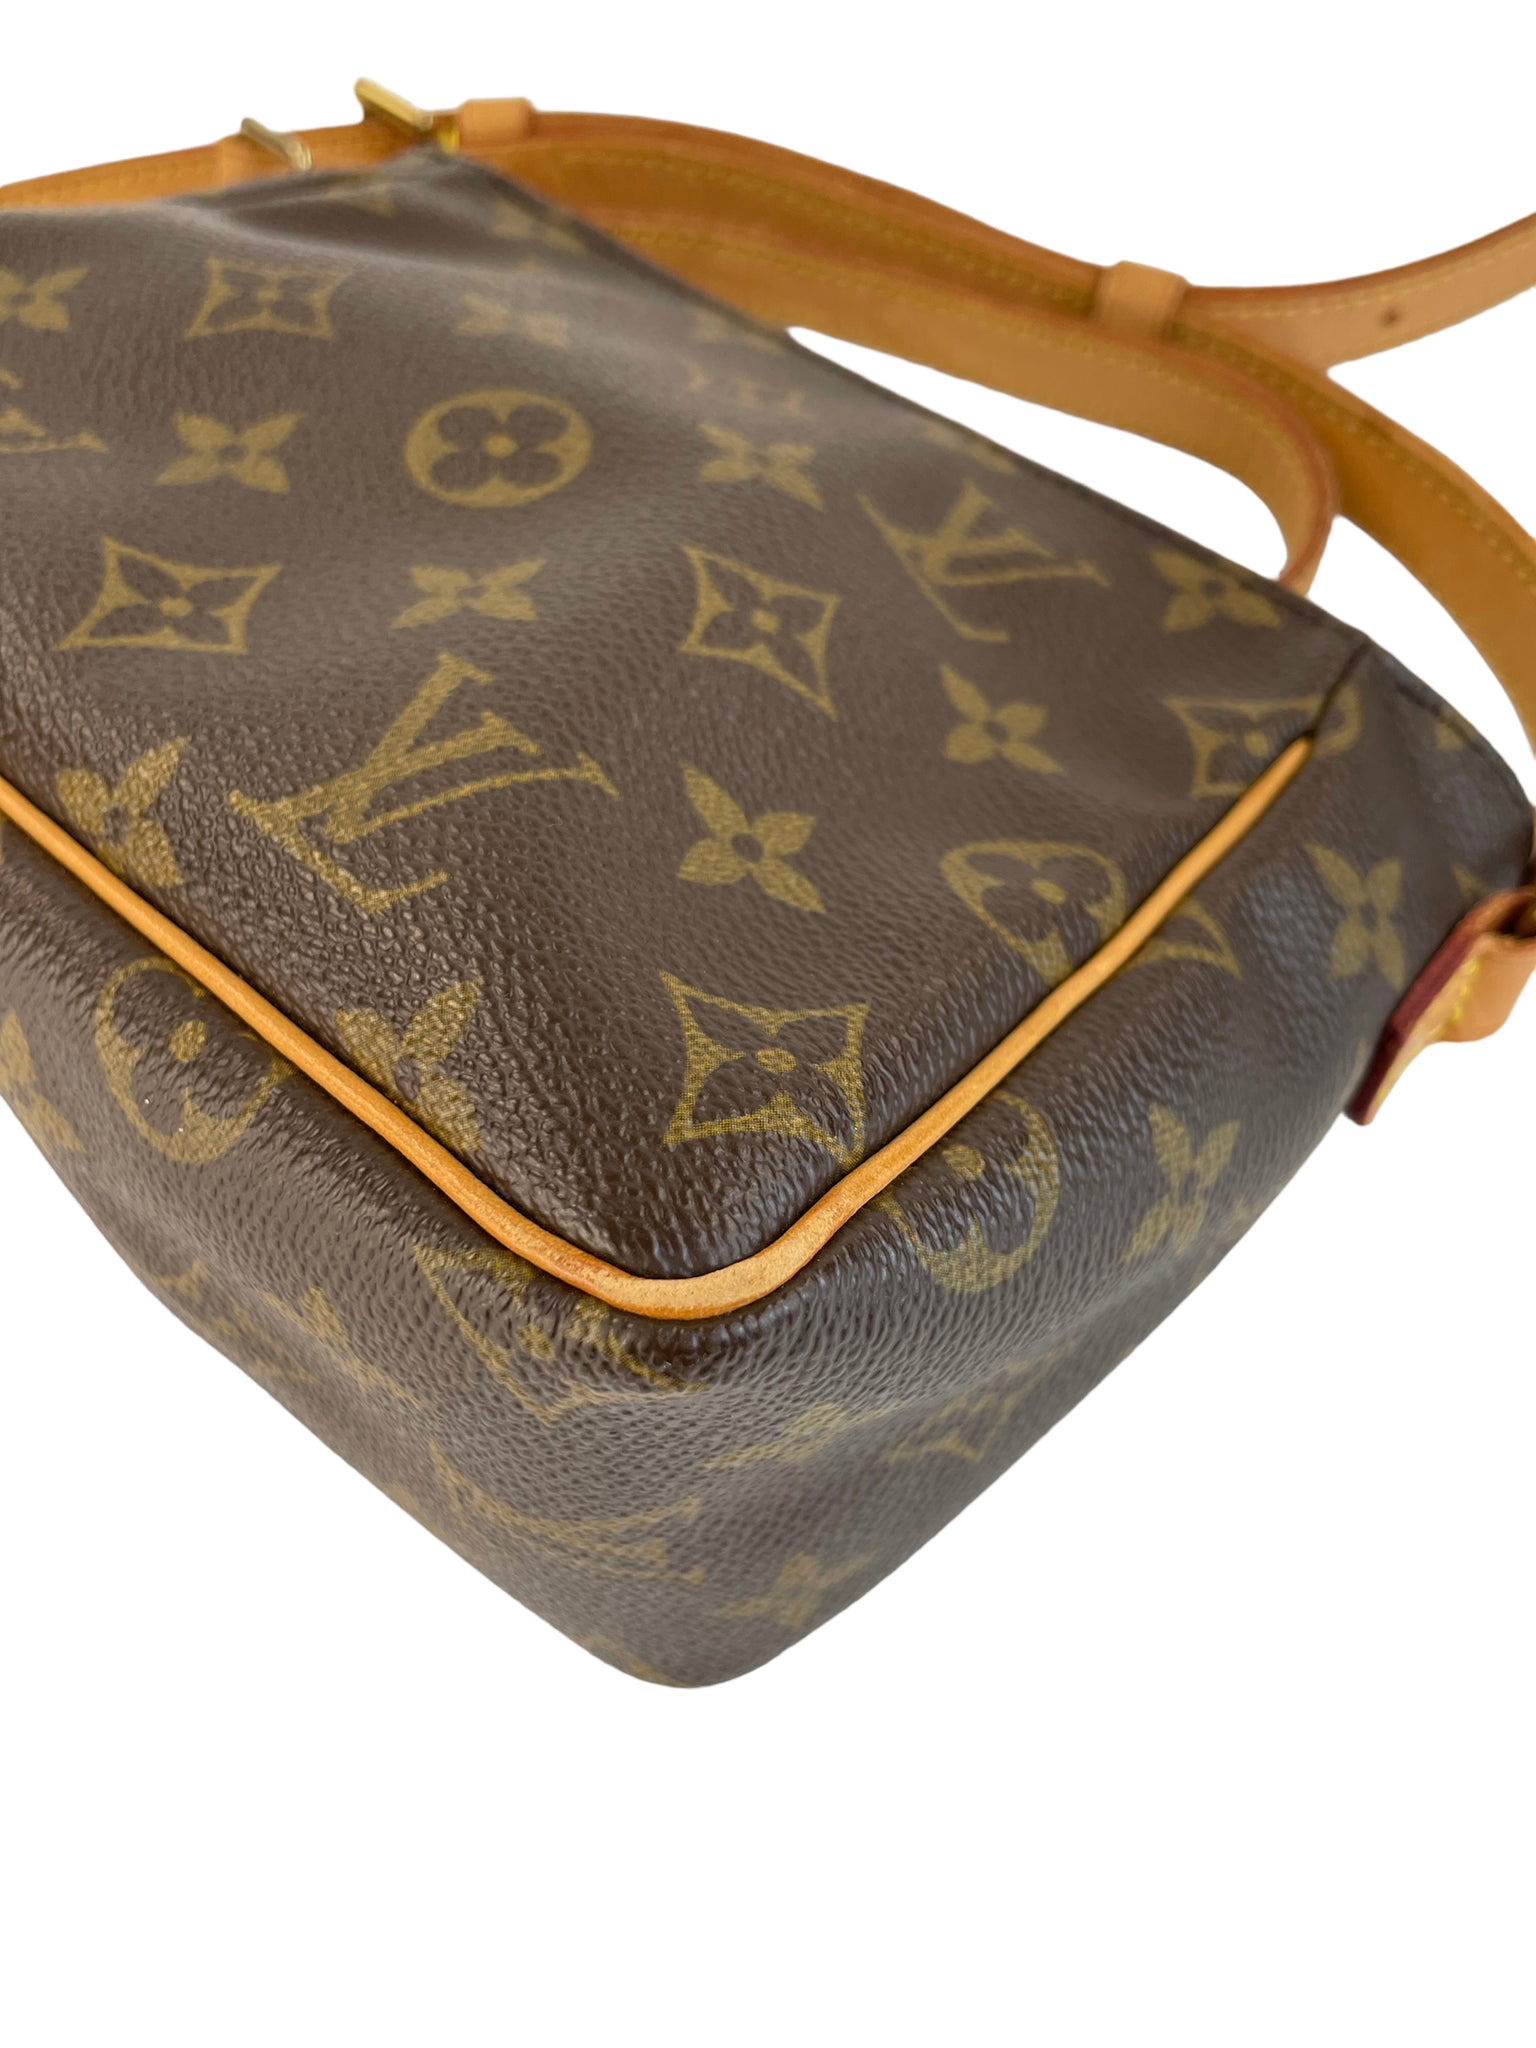 Monogram Viva cite PM Shoulder Bag，W19 × H14 × D9 cm，Good condition,  Lightly used with some visible marks and scratches.